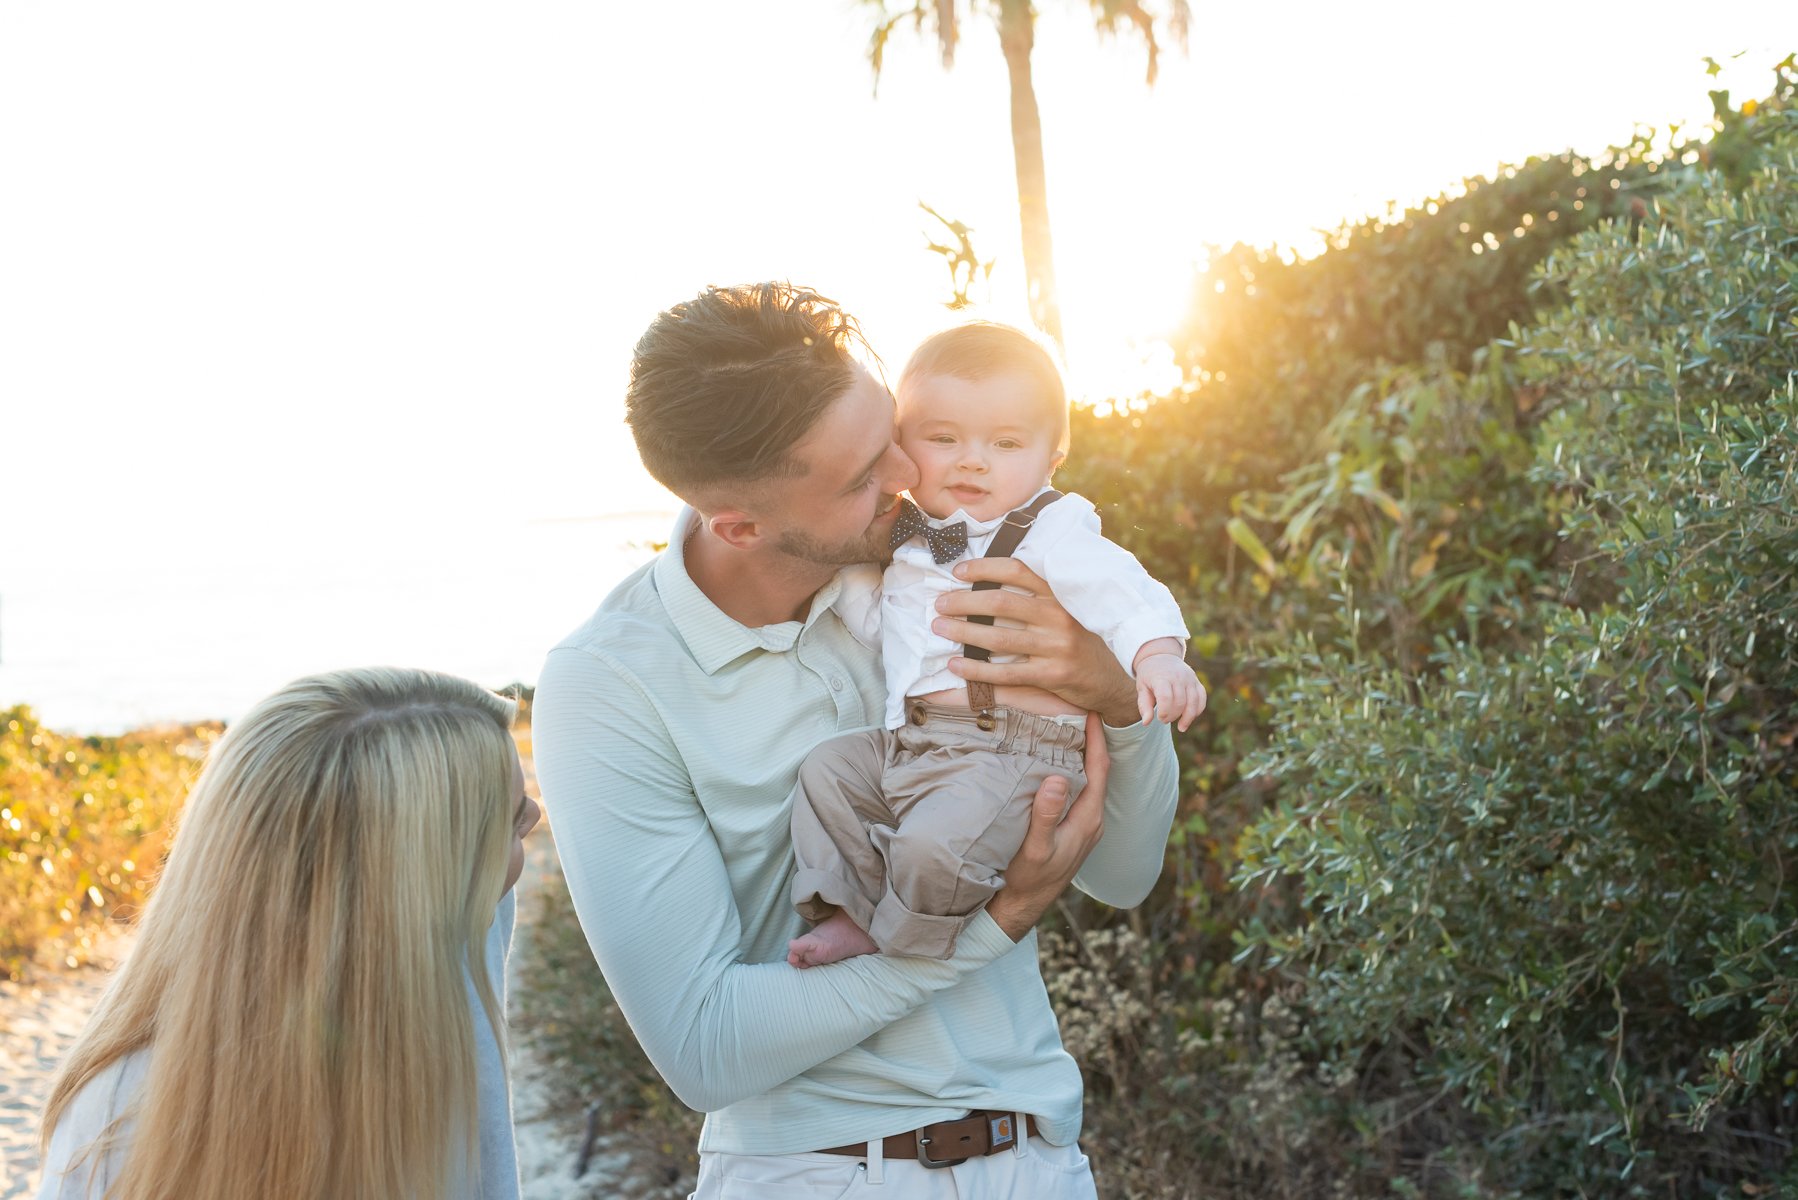  Charleston Family Portrait by Reese Moore Photography 